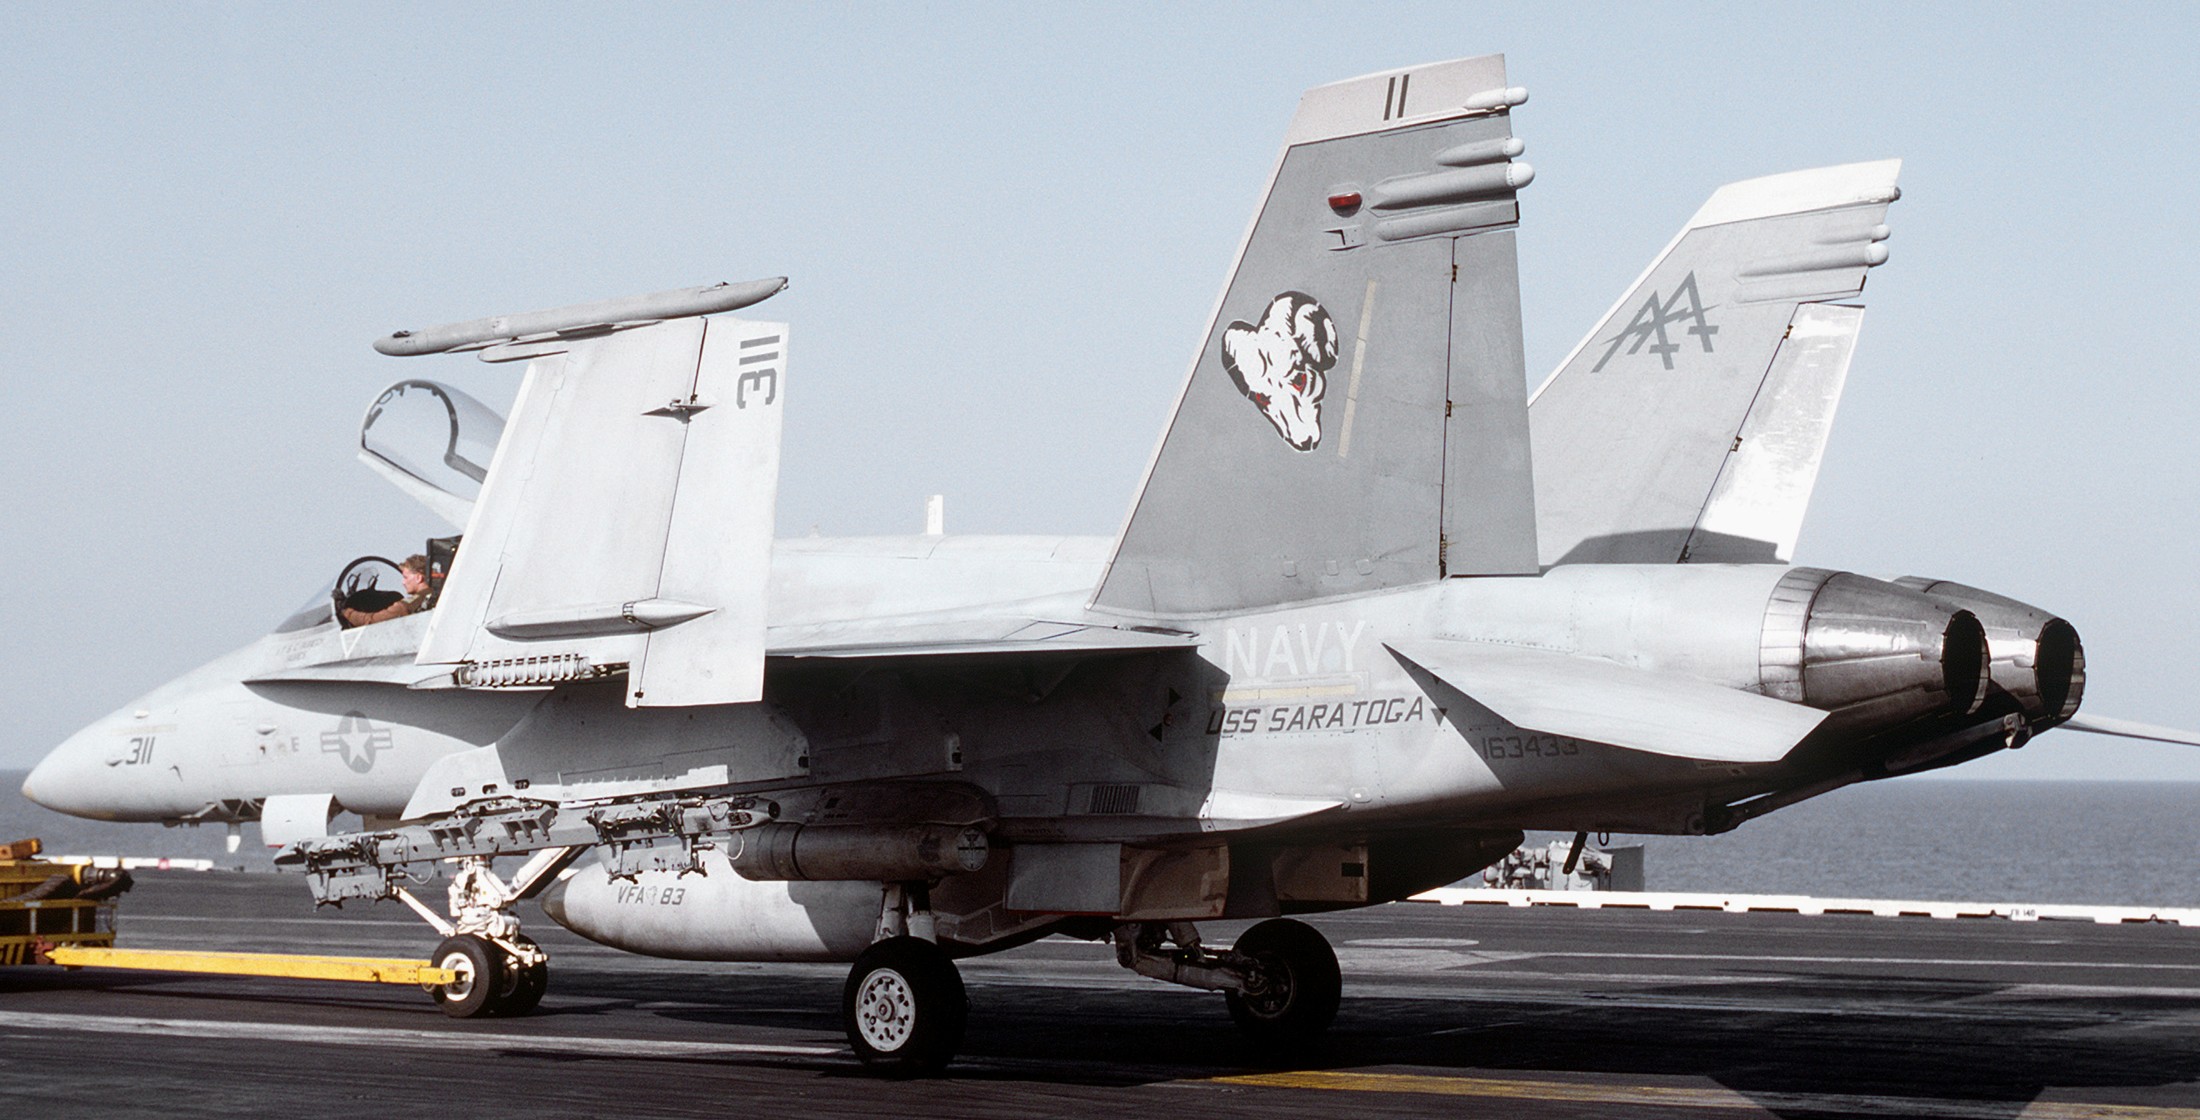 vfa-83 rampagers strike fighter squadron f/a-18c hornet cvw-17 uss saratoga cv-60 152p